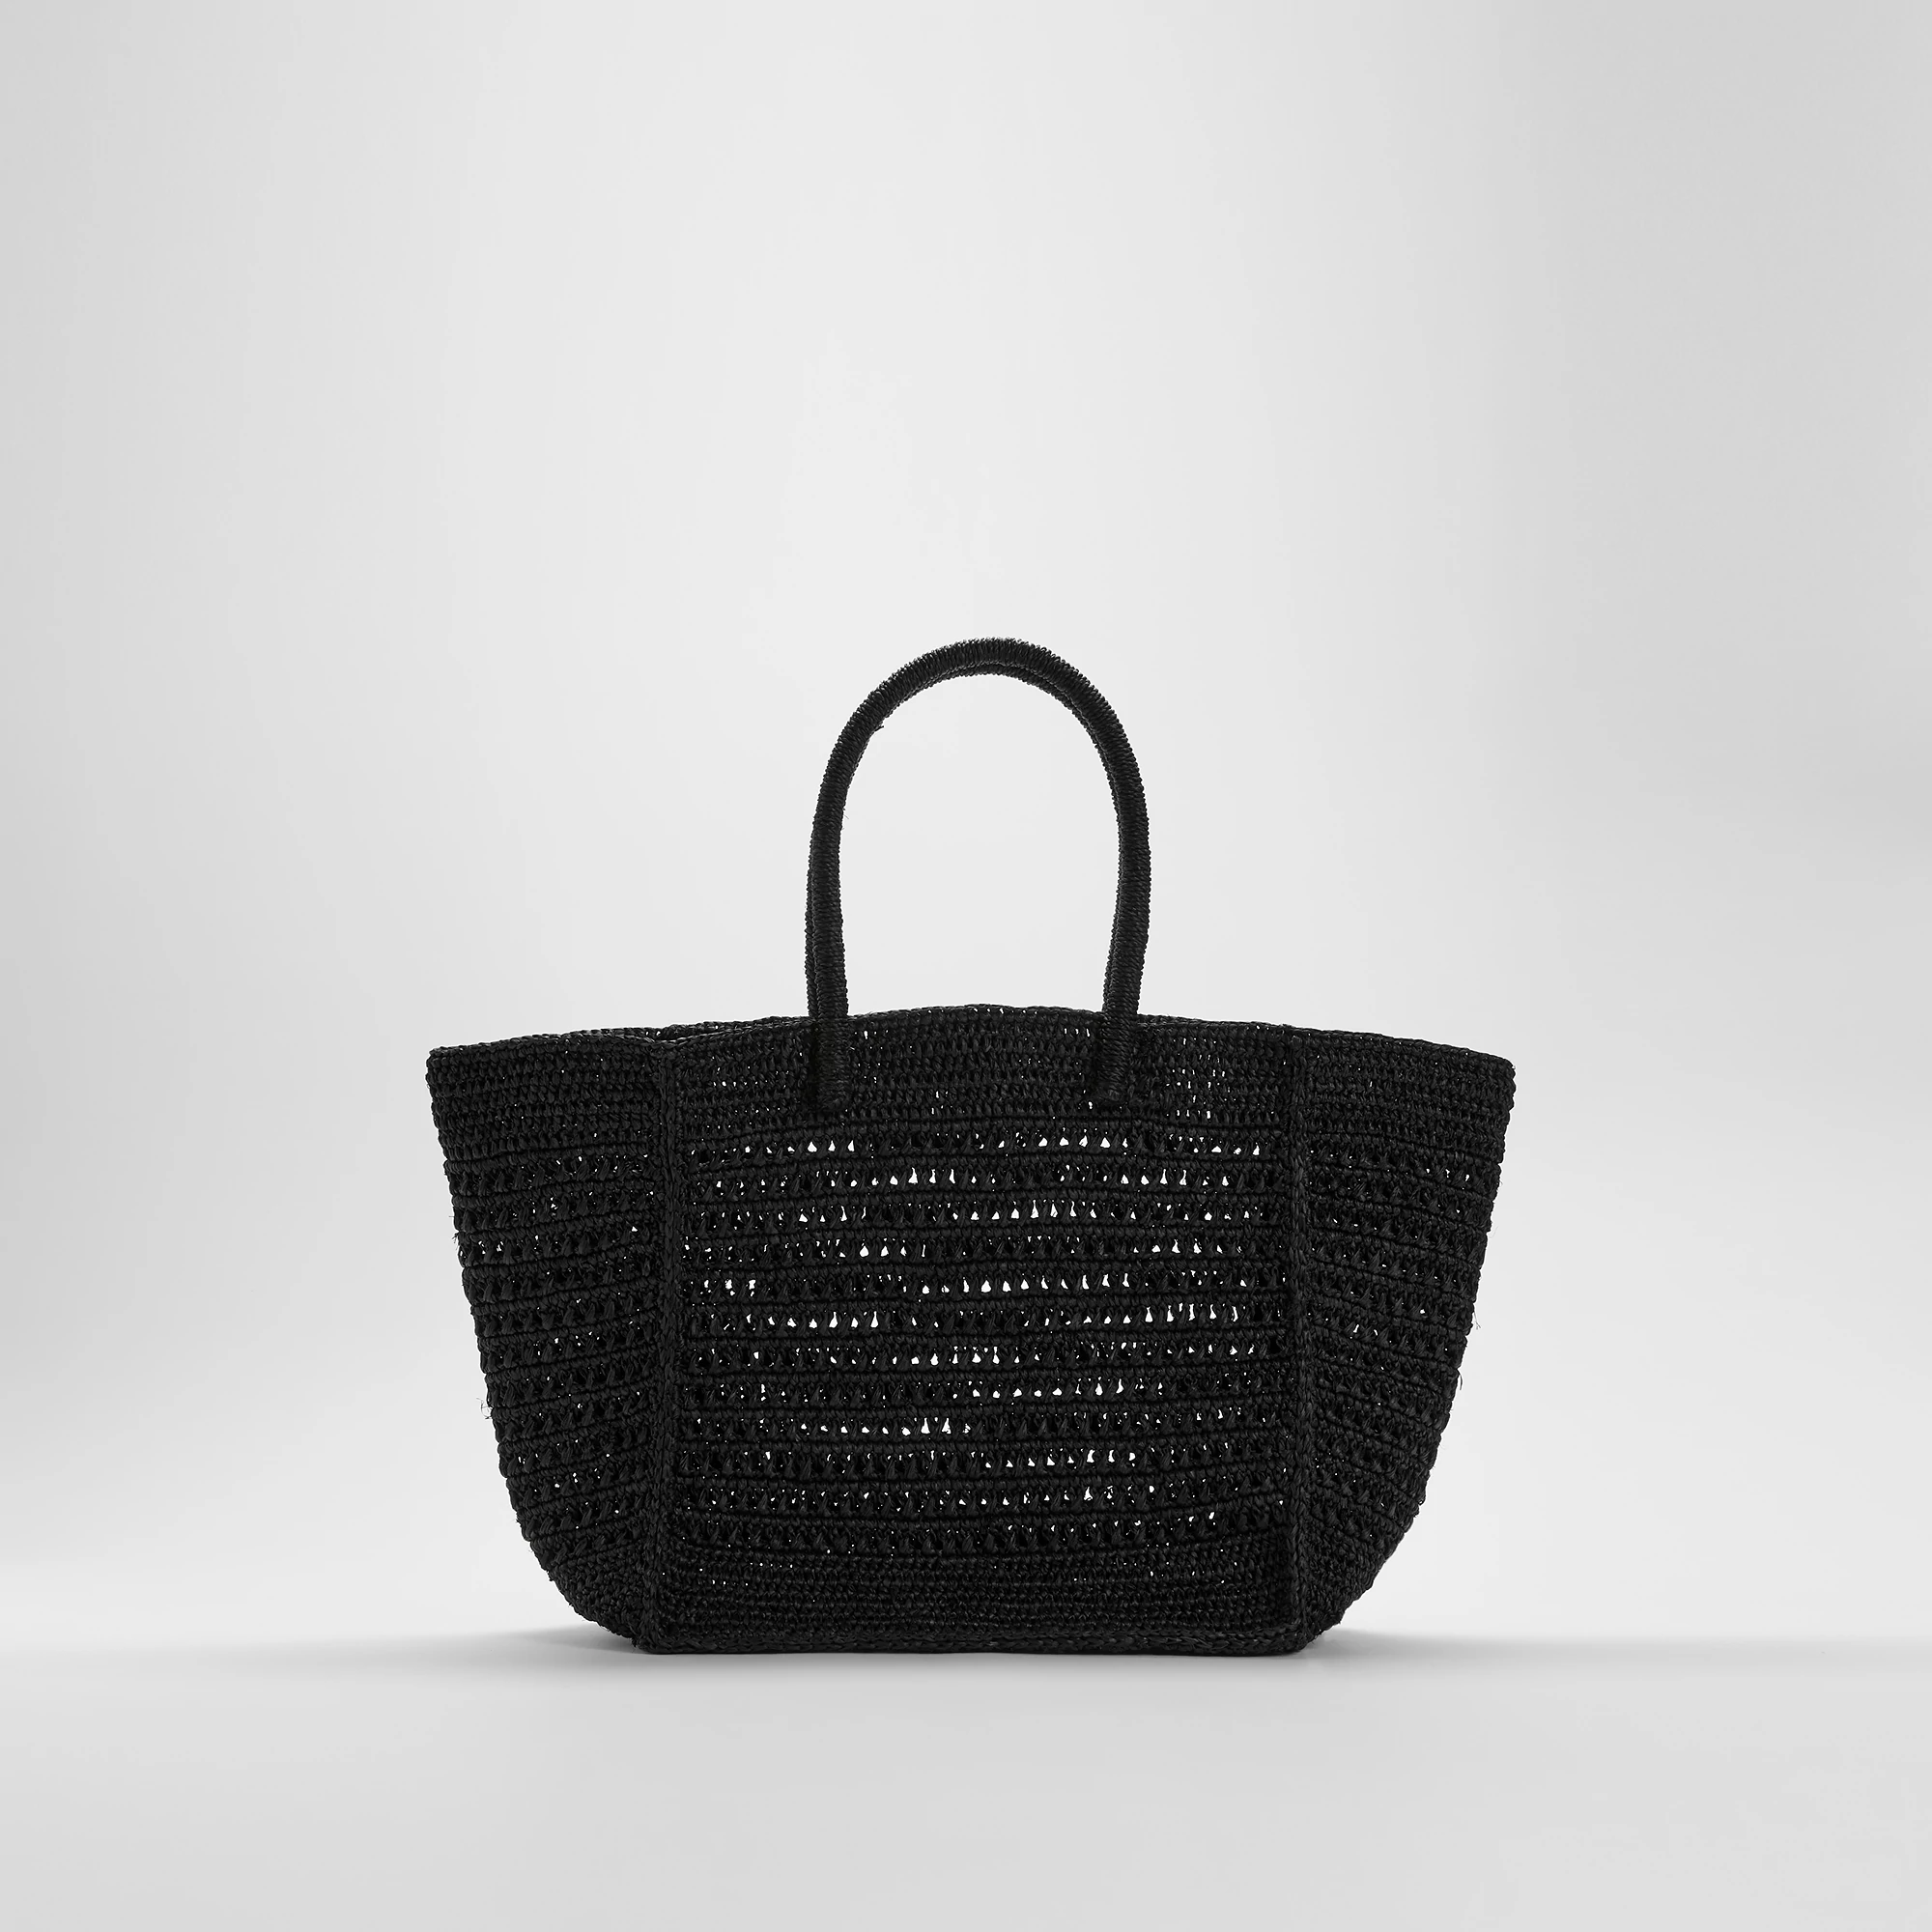 Mar Y Sol for EILEEN FISHER Beach Tote | EILEEN FISHER